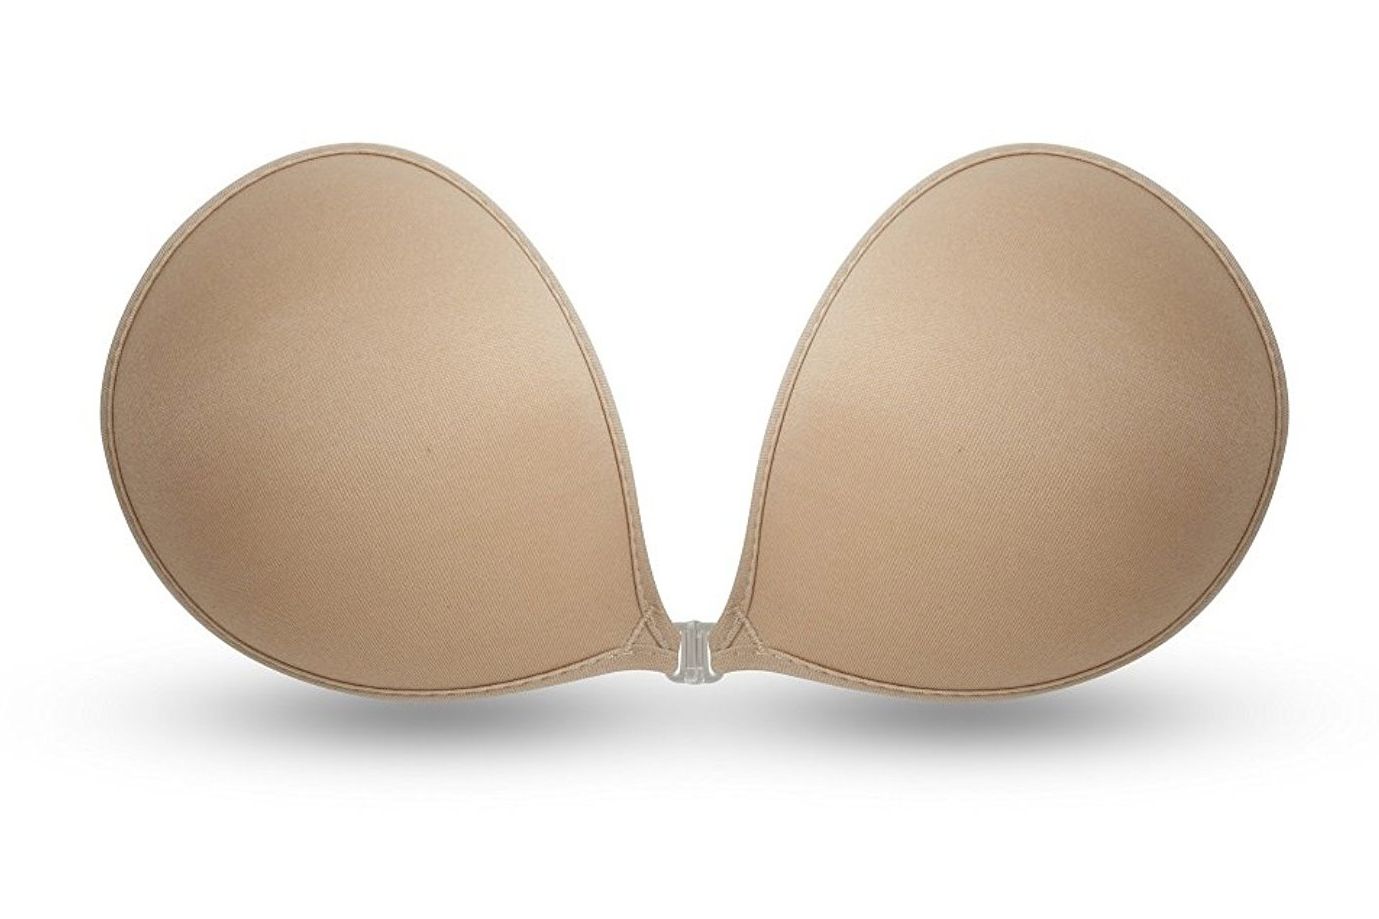 Bralux Australia  Desirable backless and stick on bra solutions A to J.